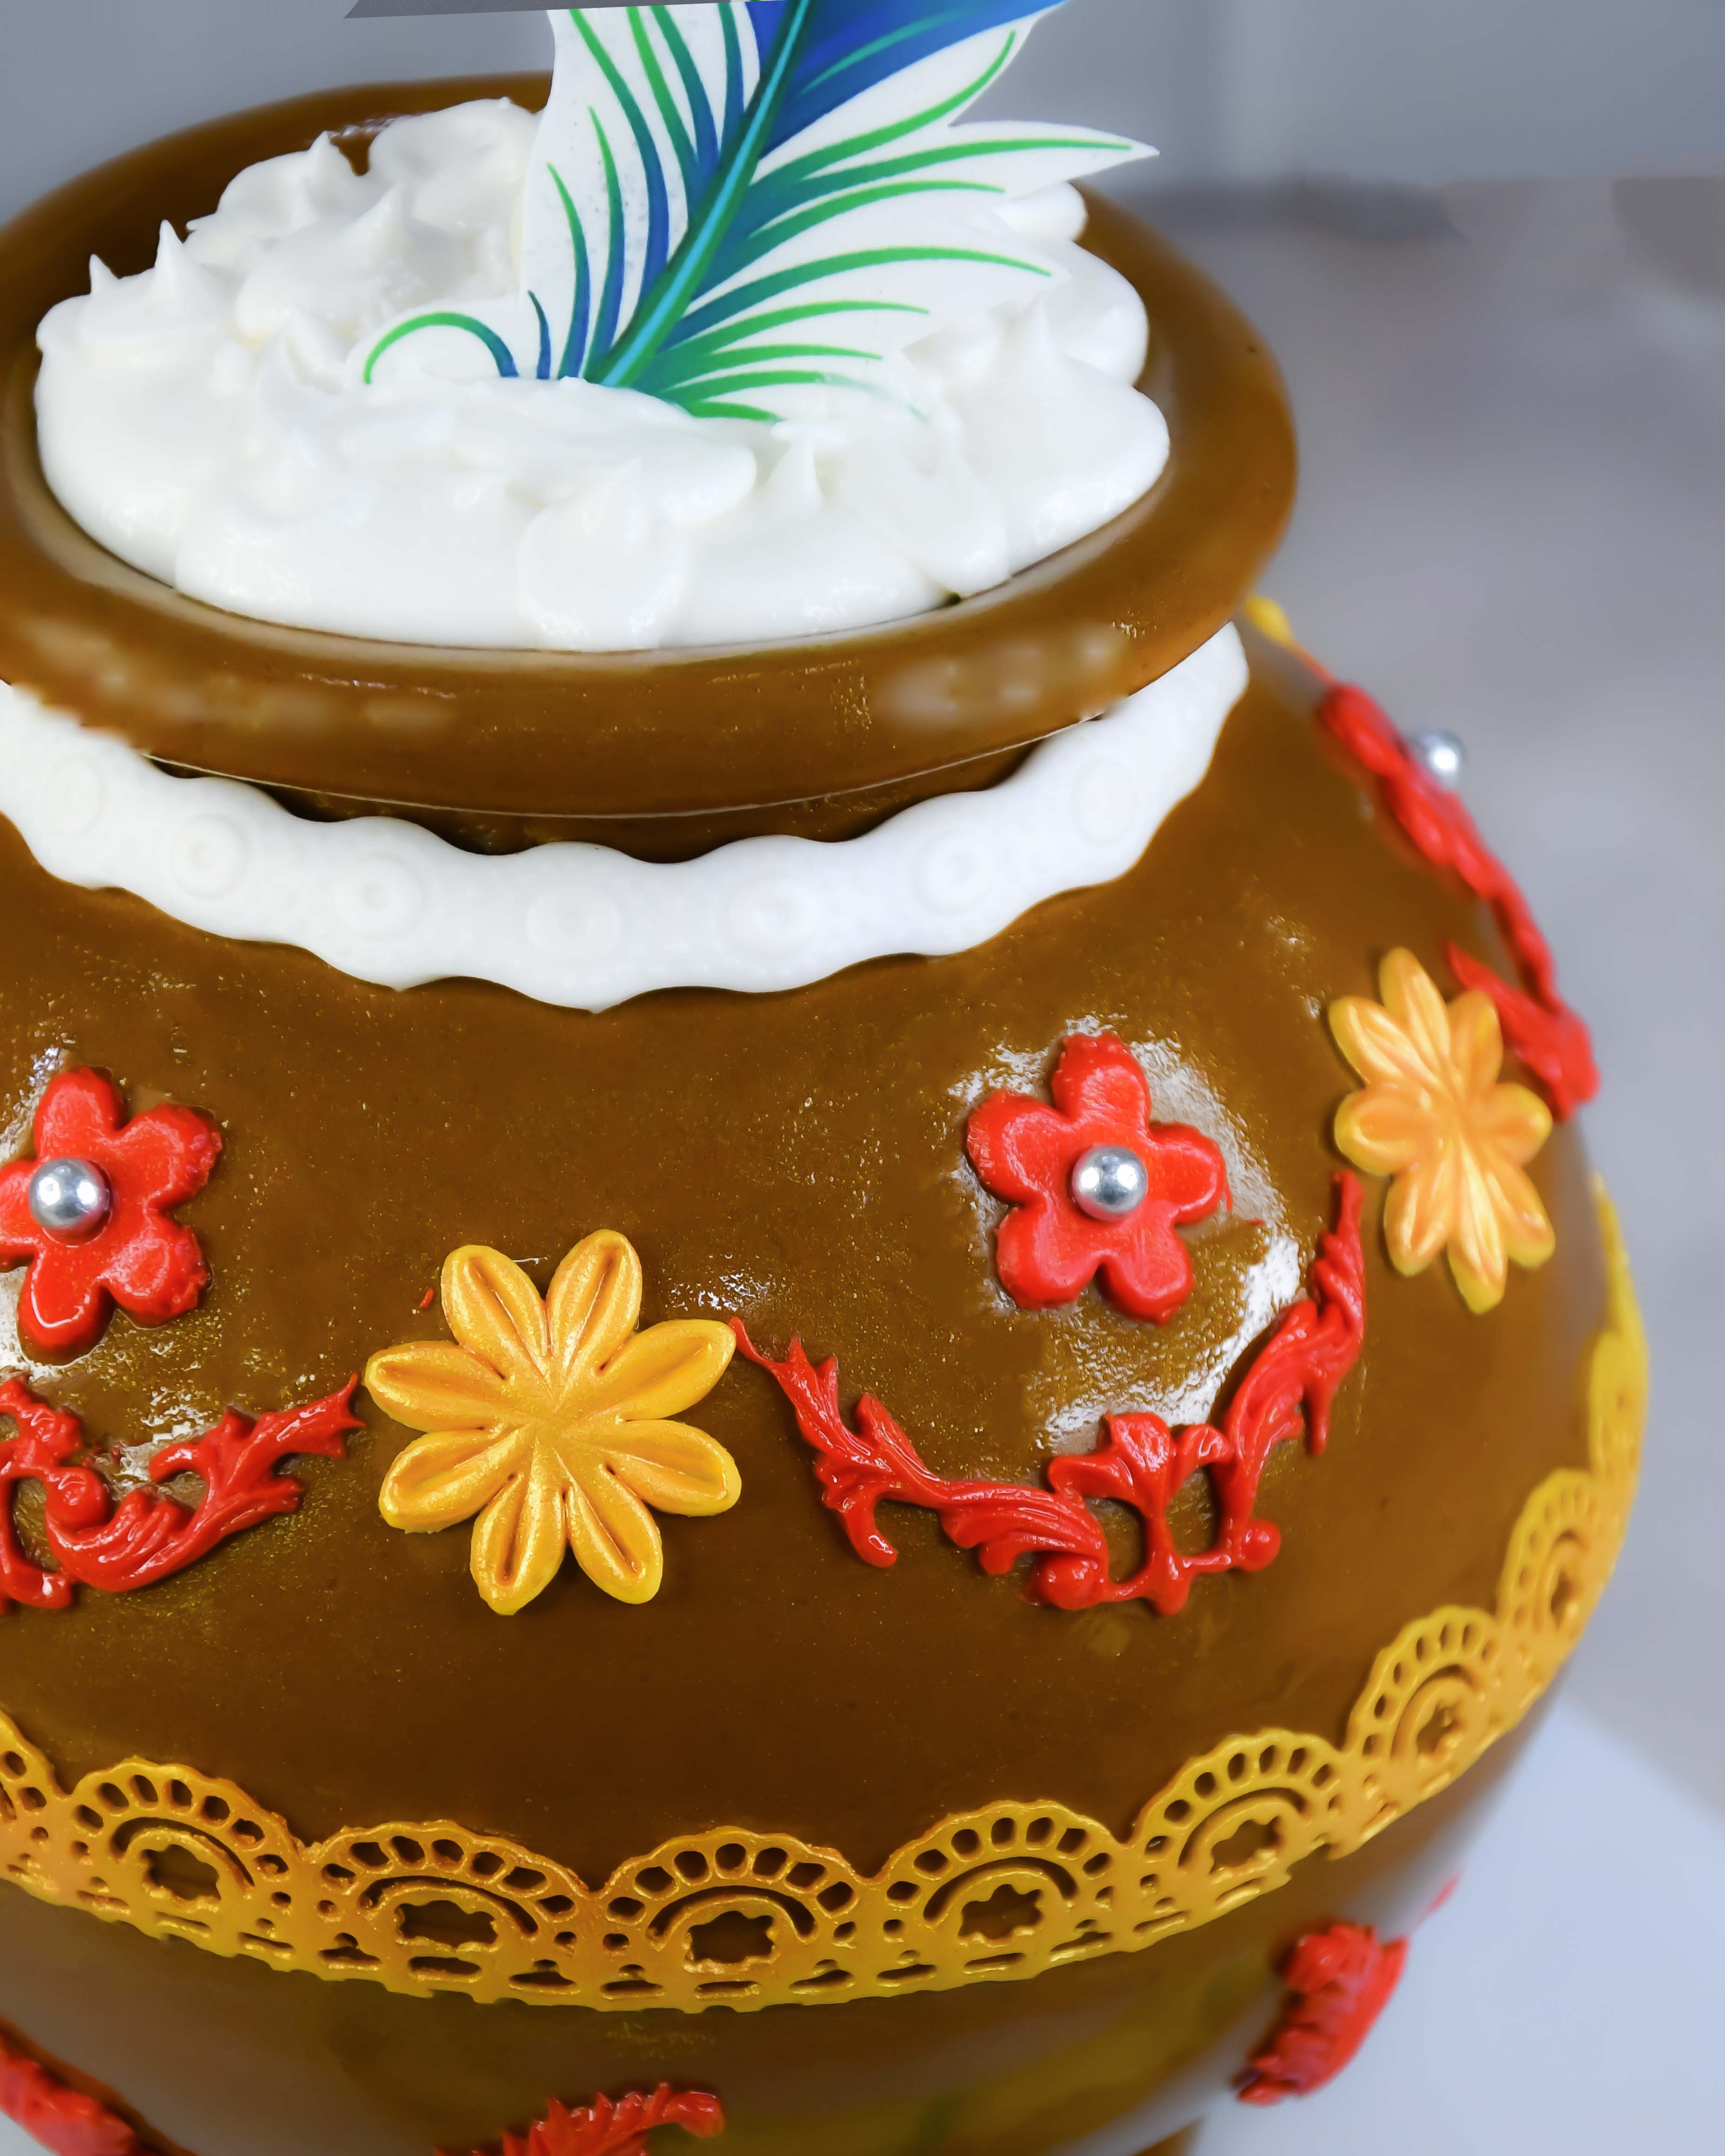 Mio Amore - Mio Amore wishes you a #SubhoBijoya. Now place order for this  beautifully hand-crafted Handi Cake from #mioamore #handicake | Facebook